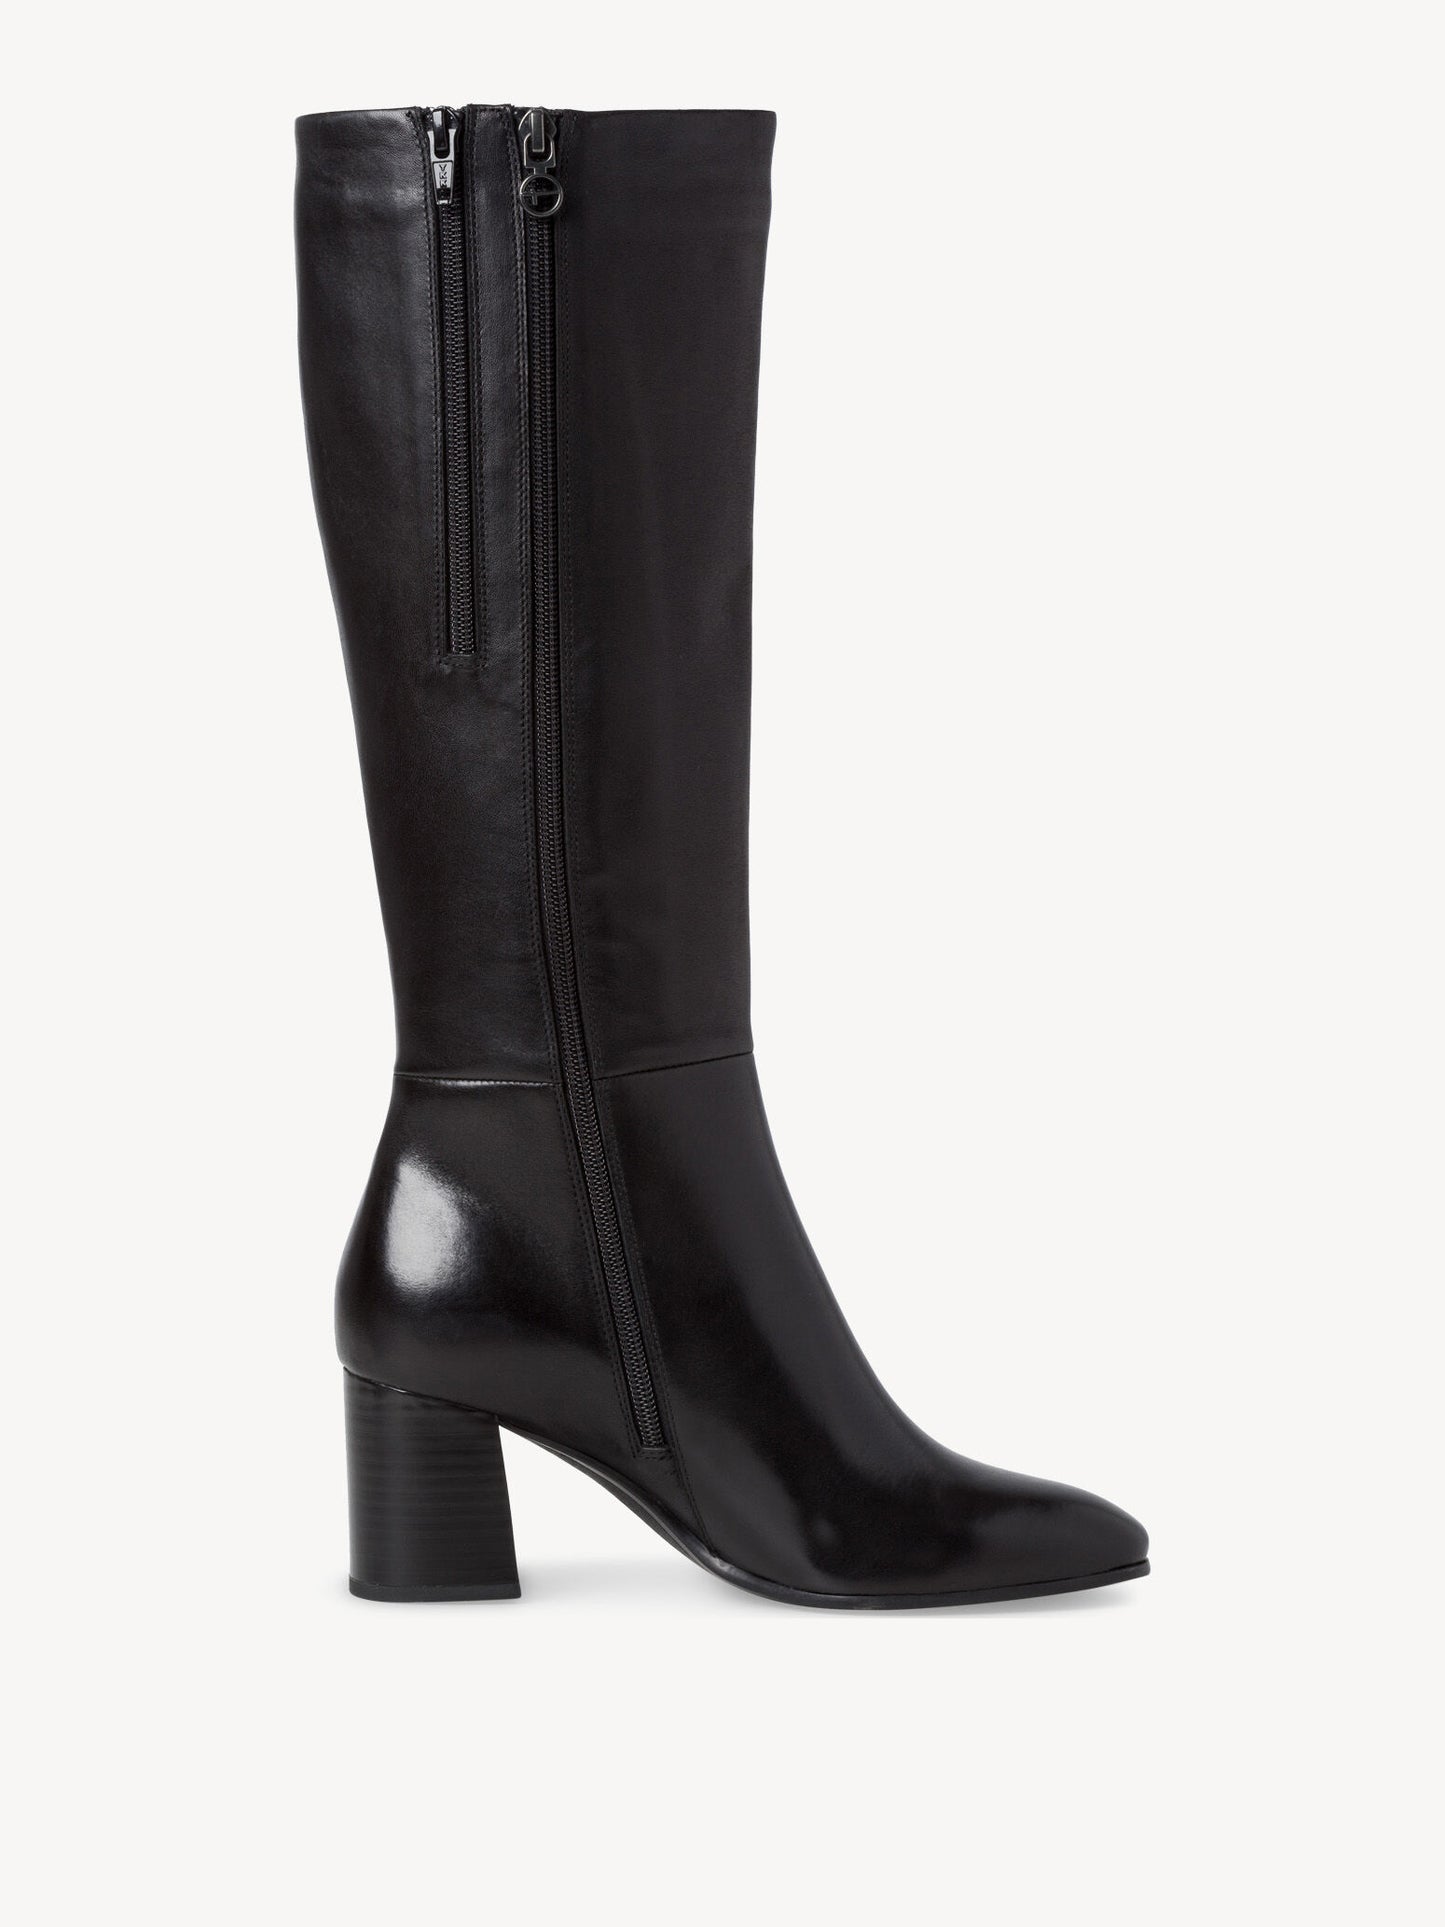 Knee High Leather Boots - Black